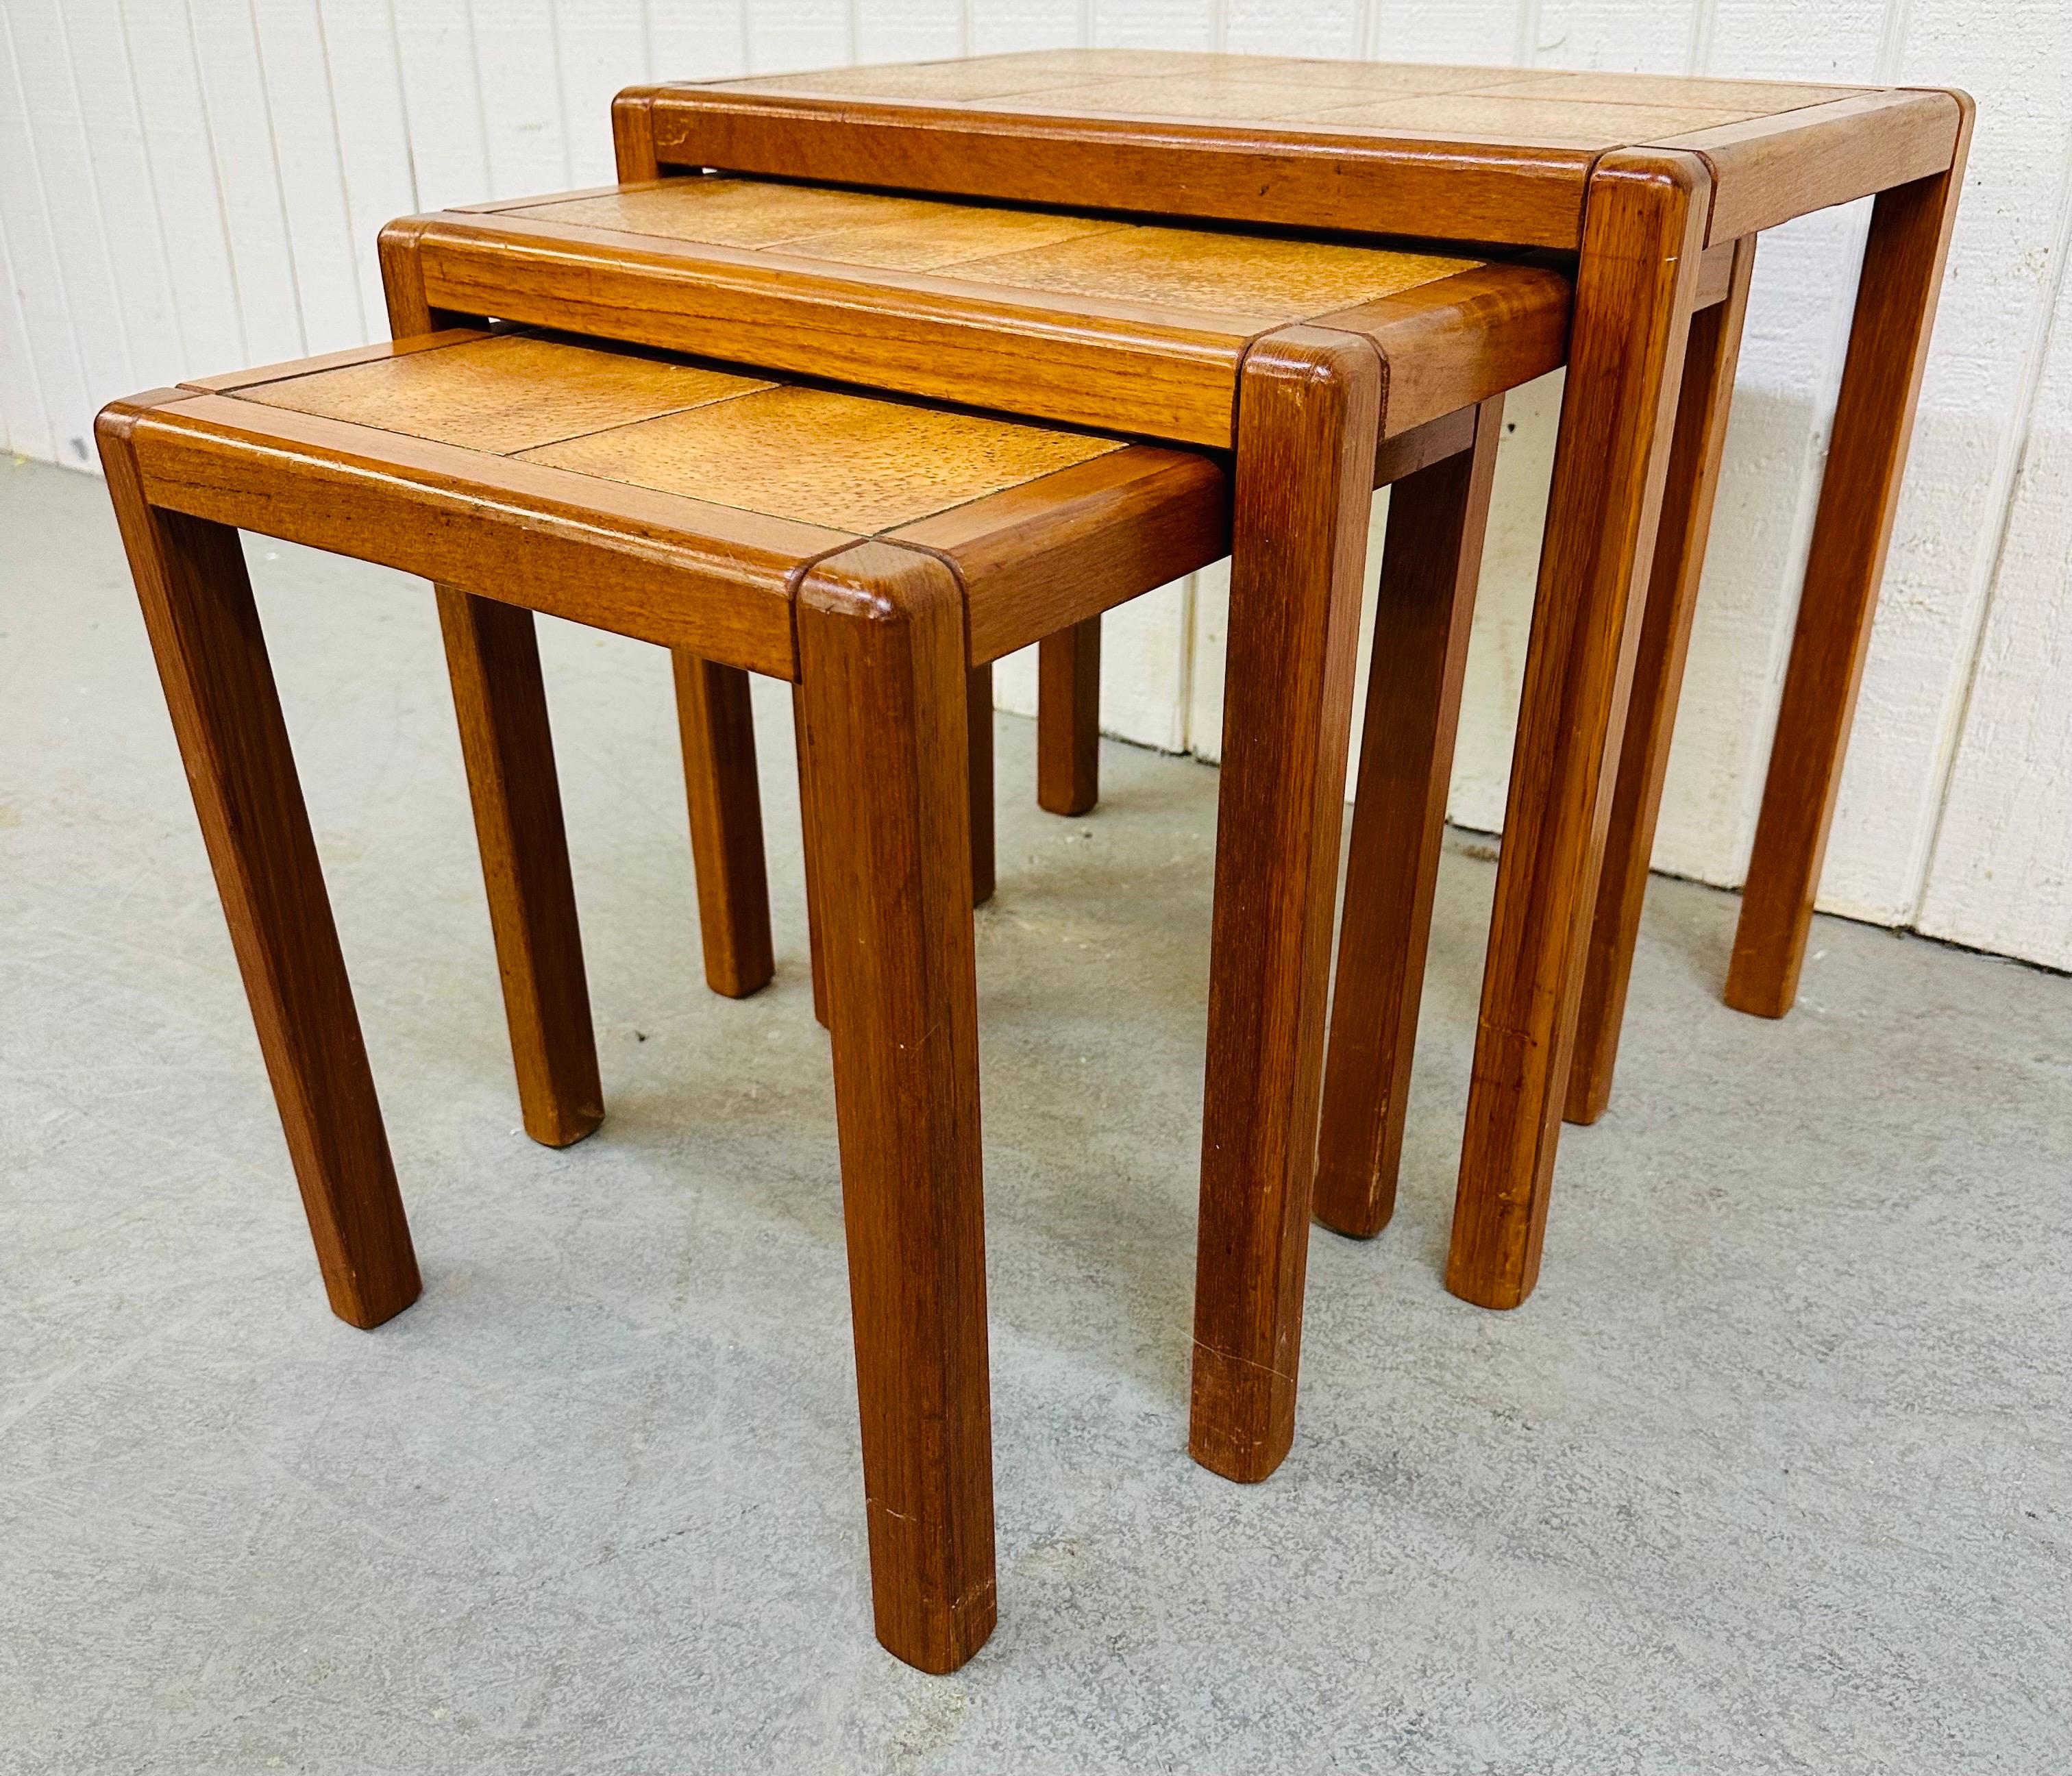 This listing is for a set of three vintage Danish Modern Teak Nesting Tables. Featuring a straight line design, rectangular tile tops, and a beautiful teak finish.